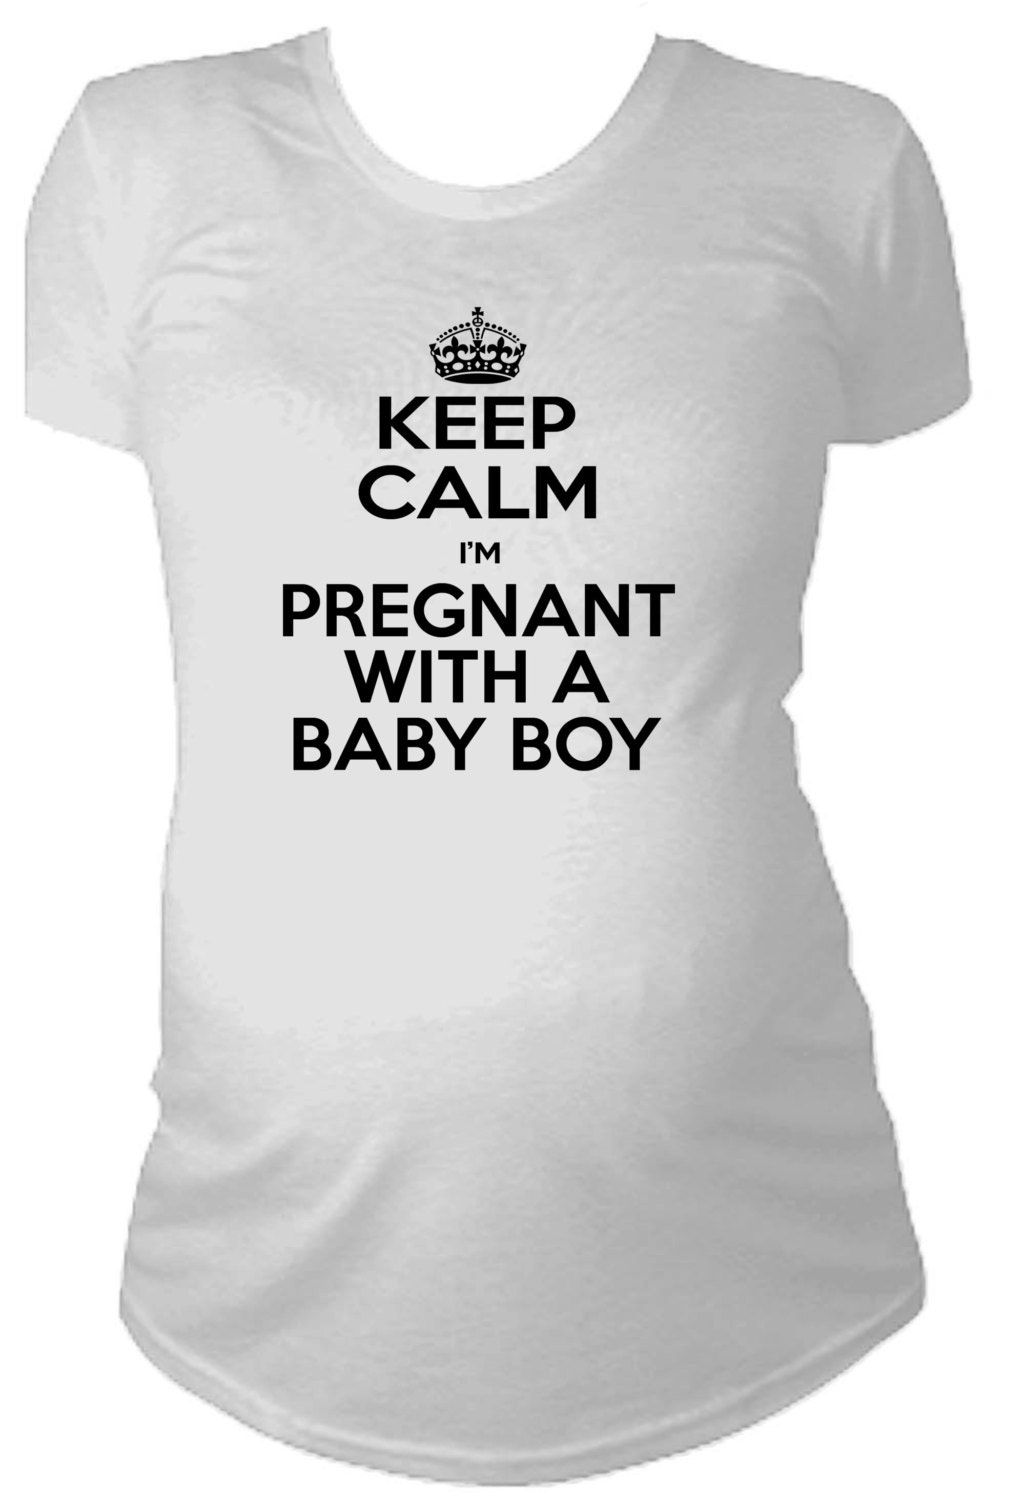 Keep Calm I'm Pregnant with a Boy Maternity Shirt baby